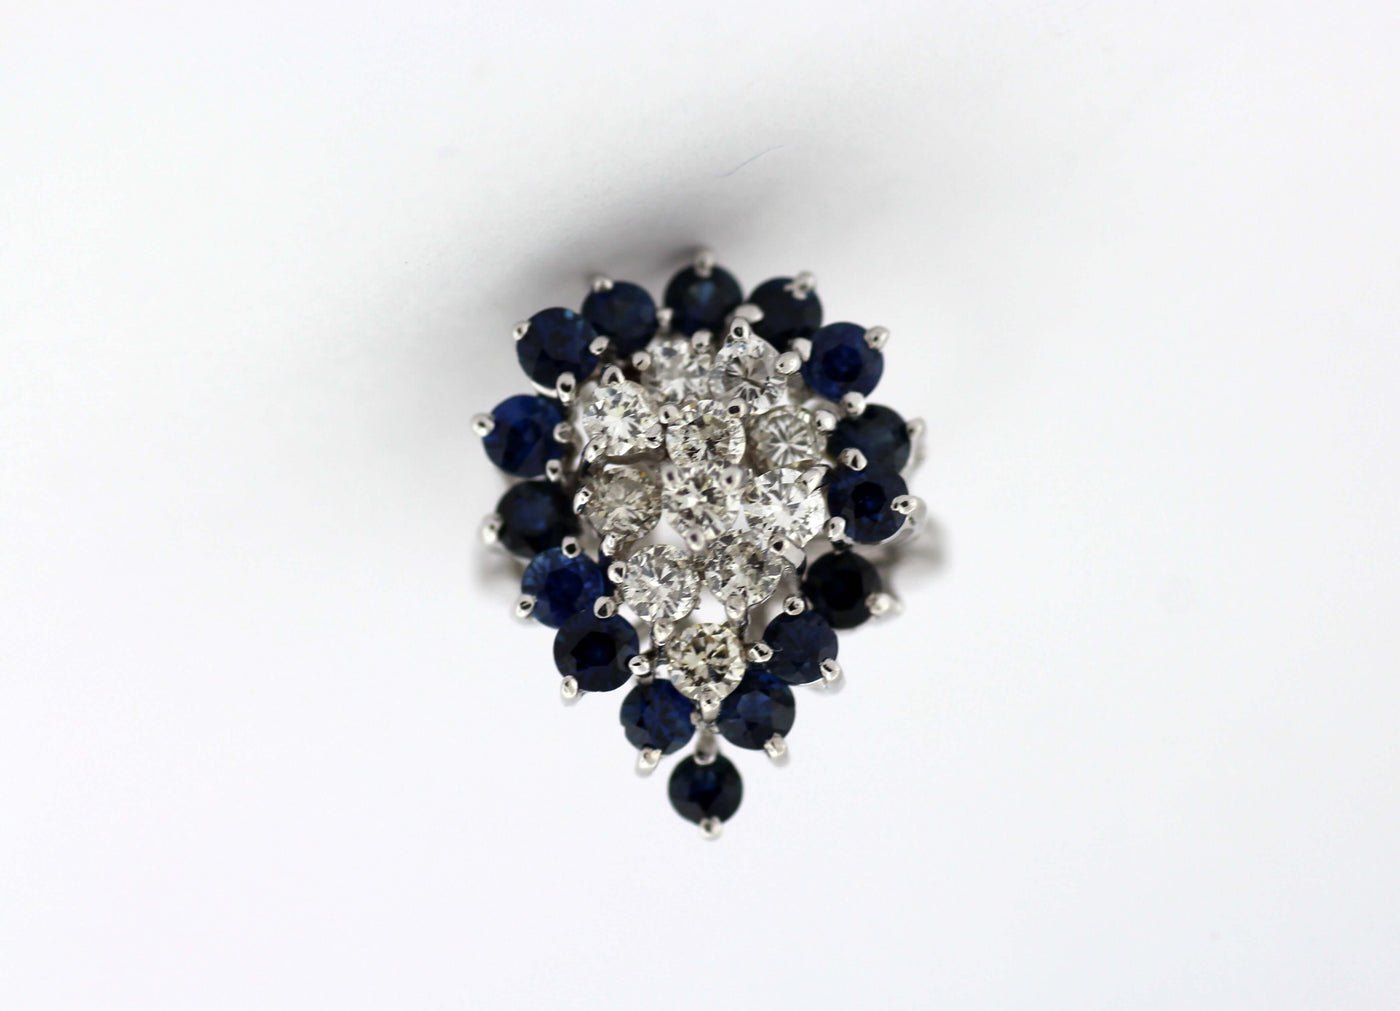 14KW 1.52 CTTW SAPPHIRE AND DIAMOND RING 1.08 CTTW H-SI2